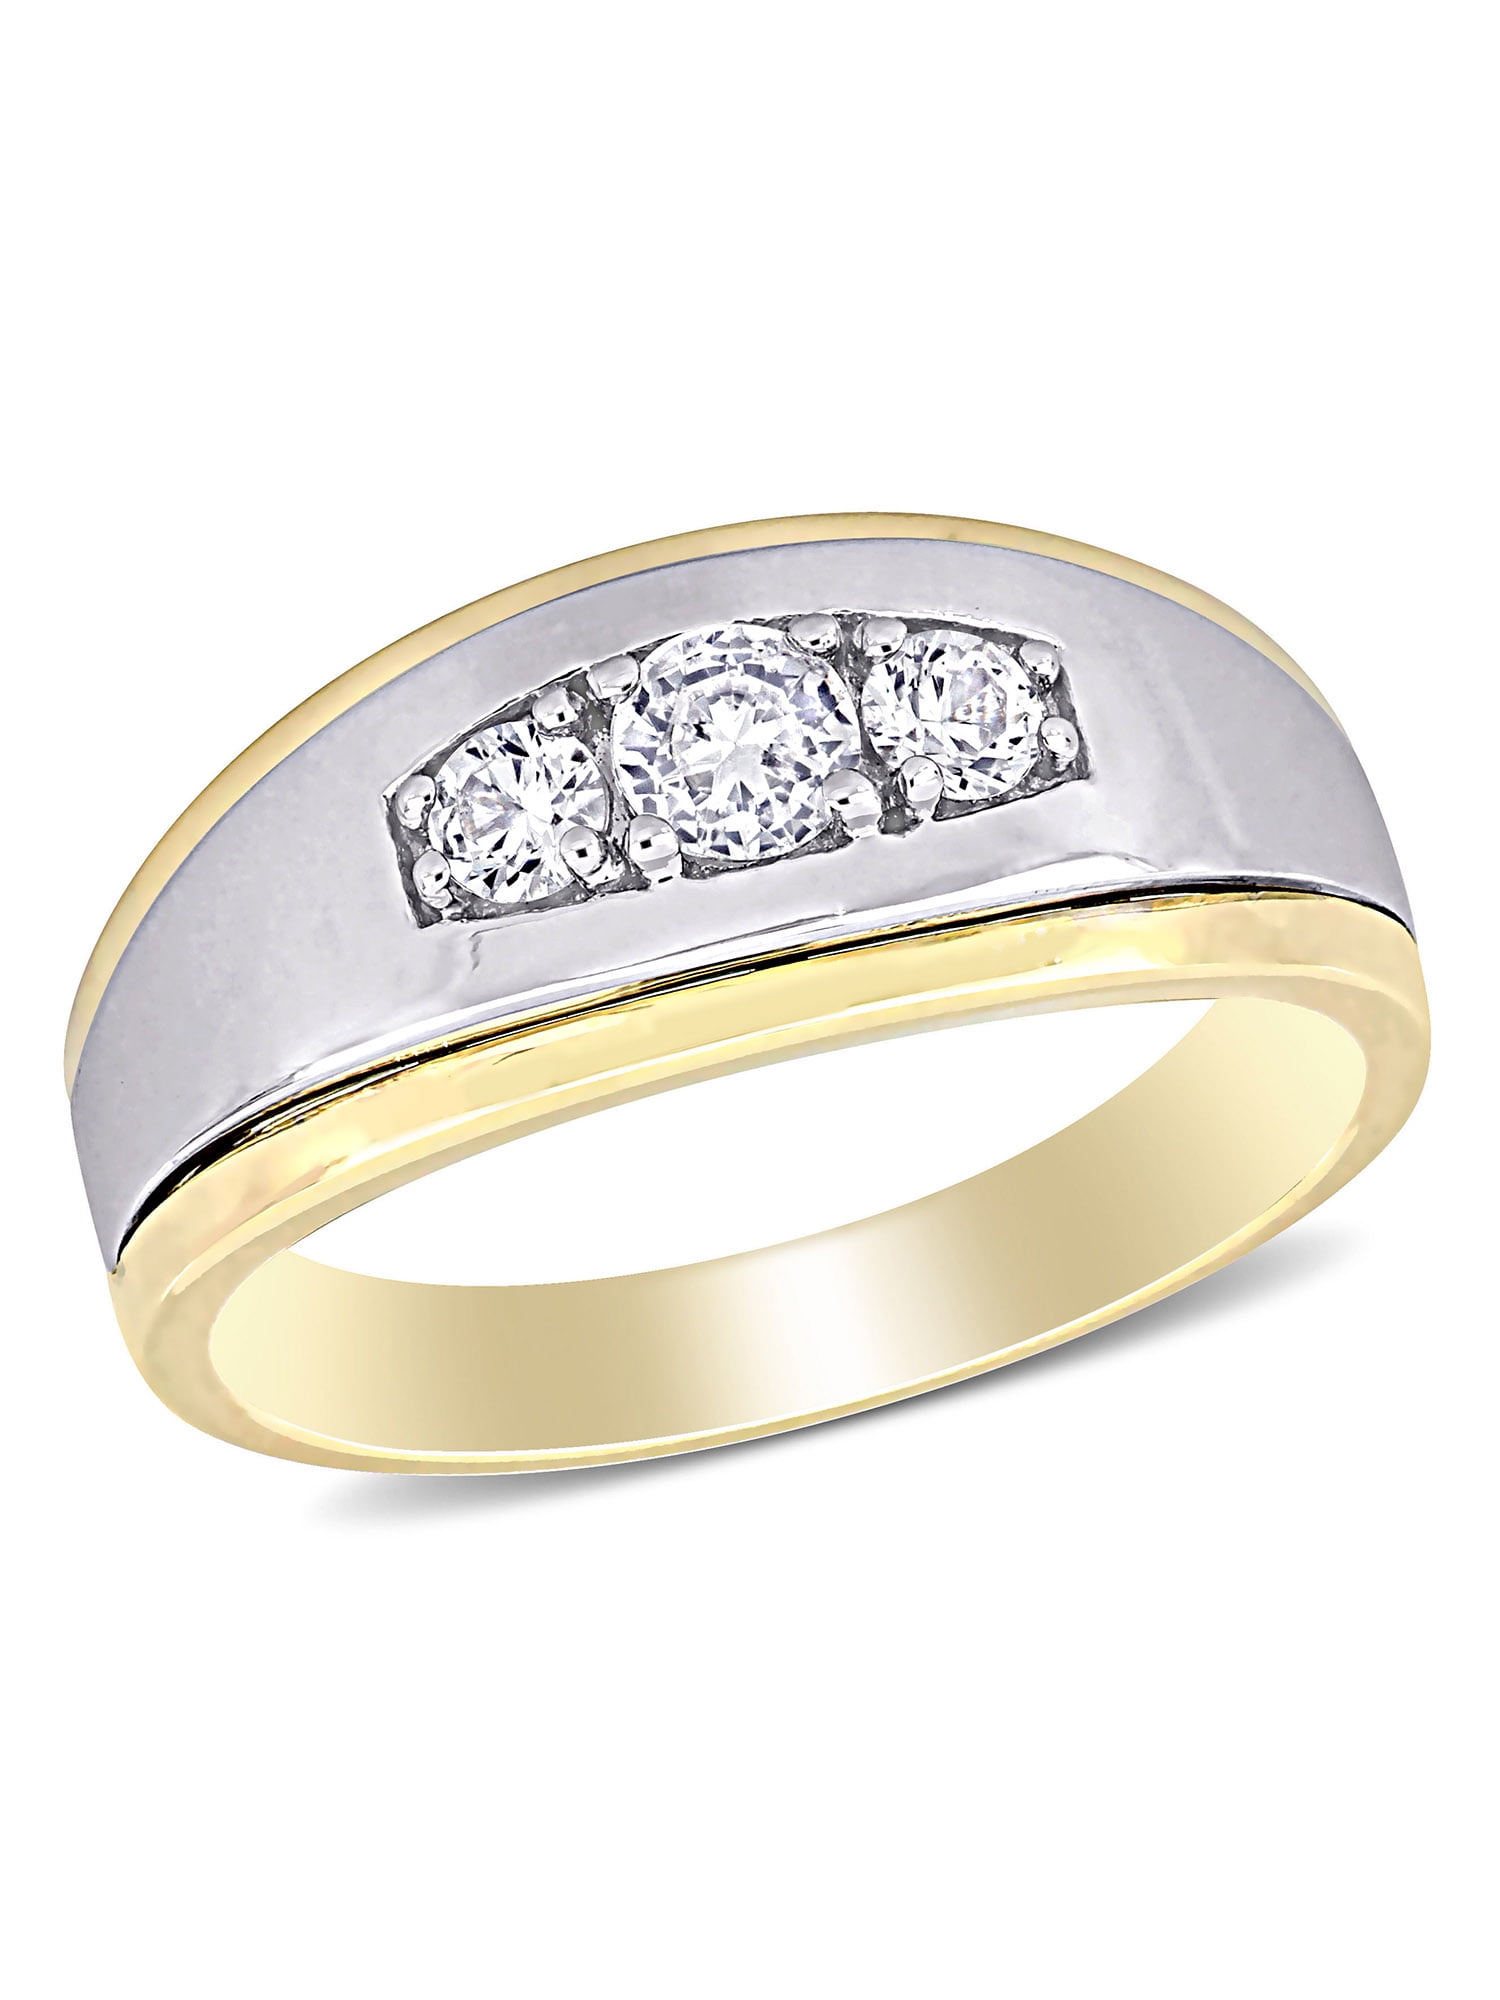 White Sapphire CZ Stone 10KT White & Yellow Gold Filled Cross Band Eternity Ring 